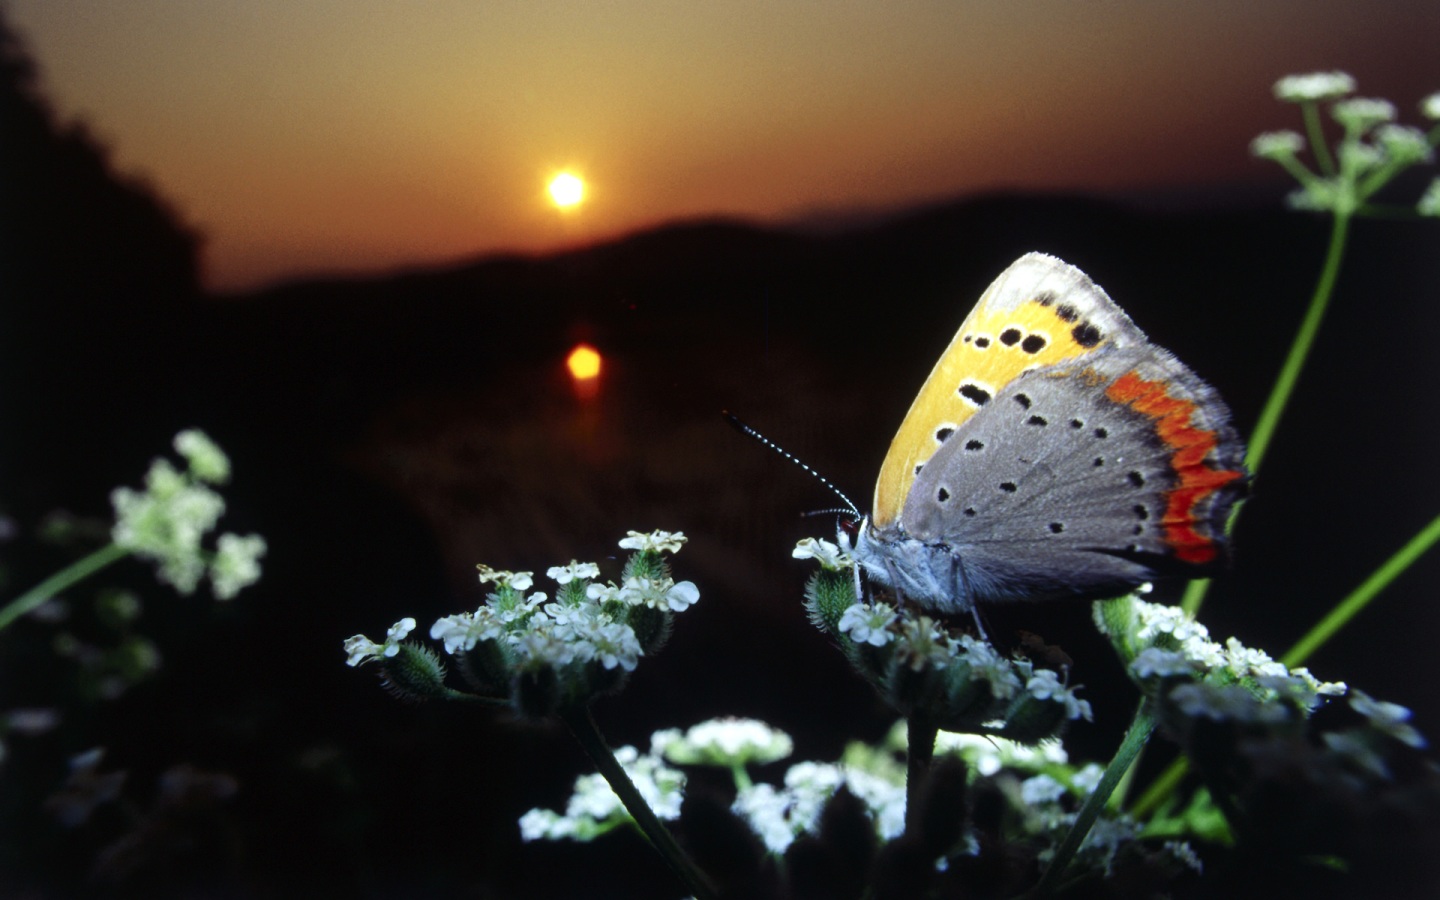 Beautyful Nature Wallpaper Scenery A Butterfly Perched On